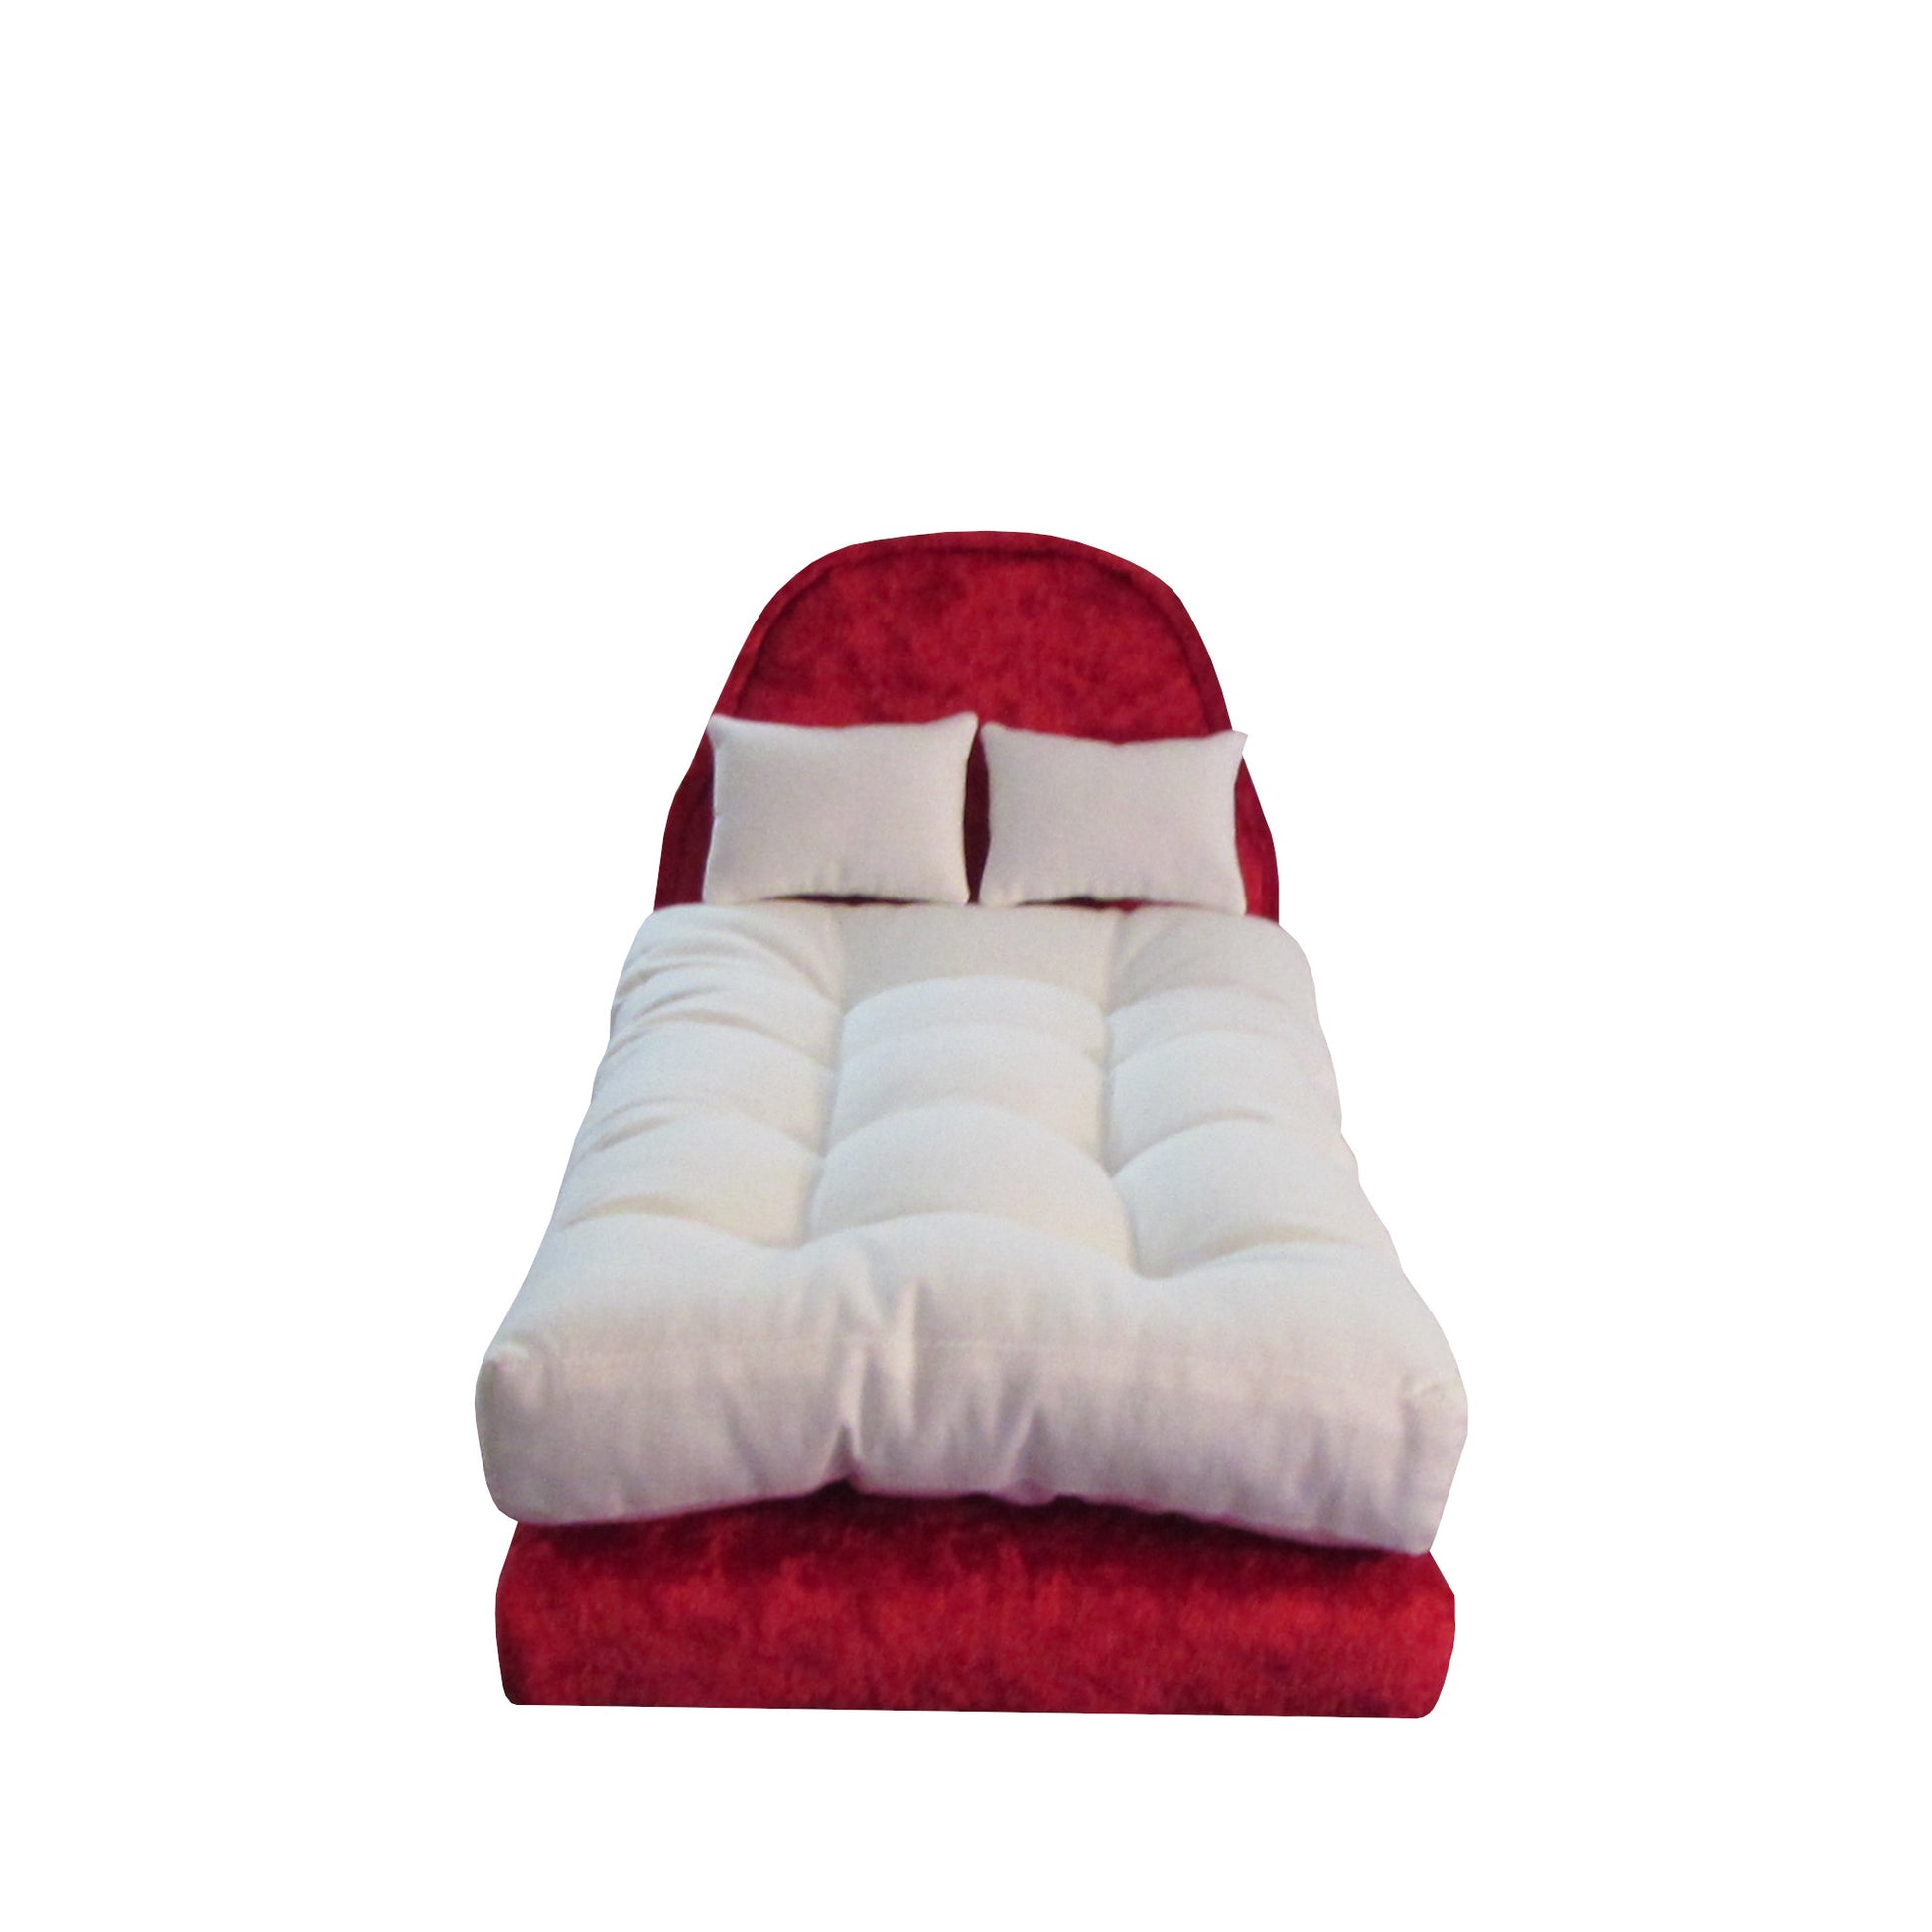 Red Crushed Velvet Double Doll Bed, Pillows, and Mattress for 11.5-inch and 12-inch dolls Second view